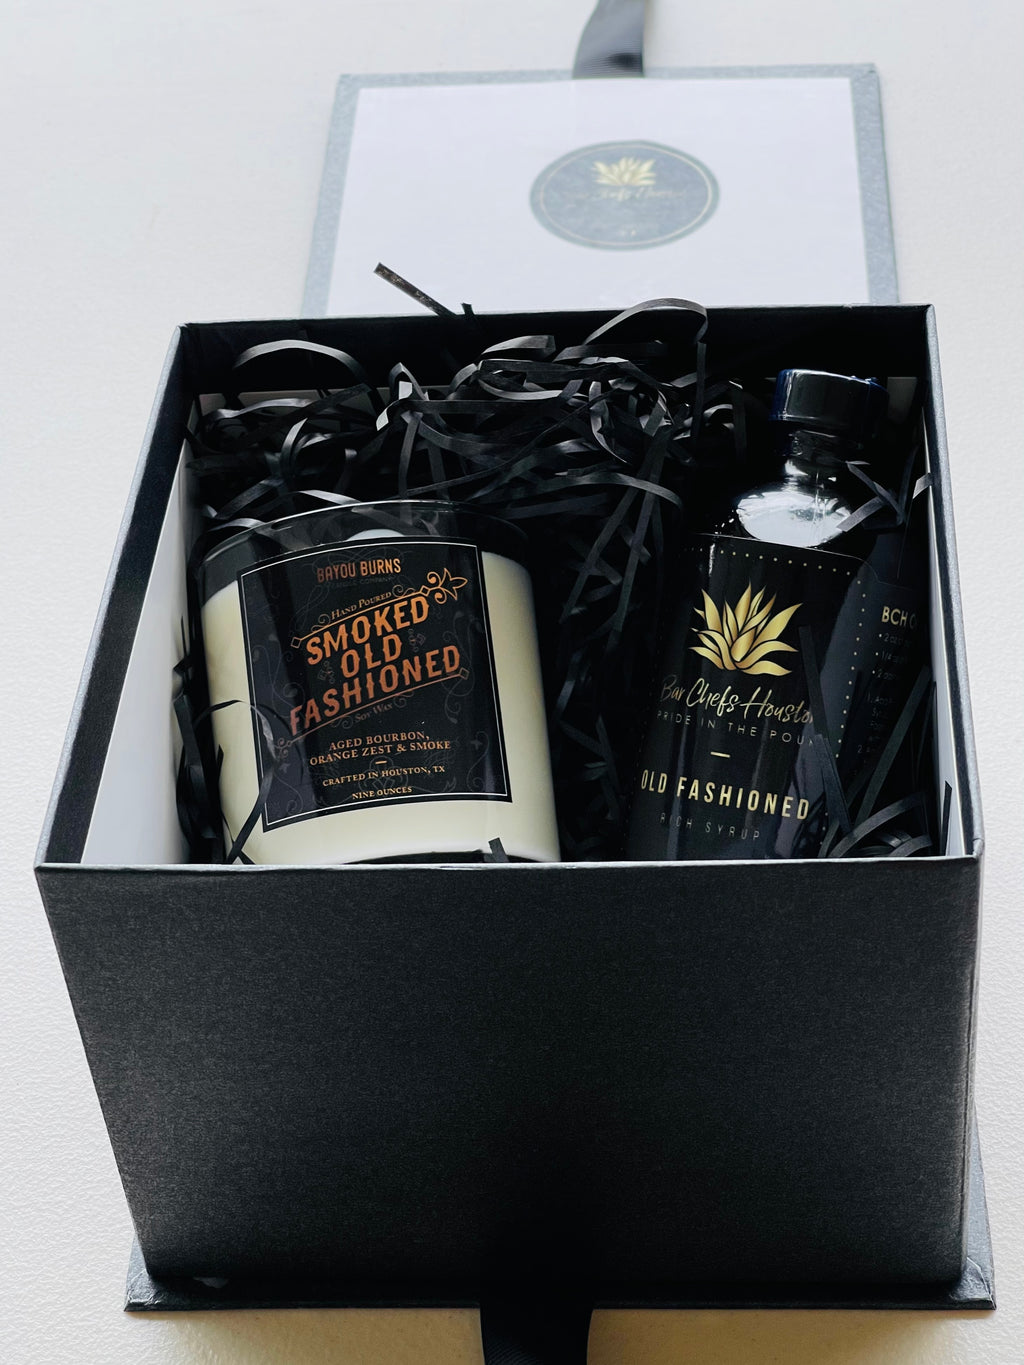 Candle and Syrup gift set